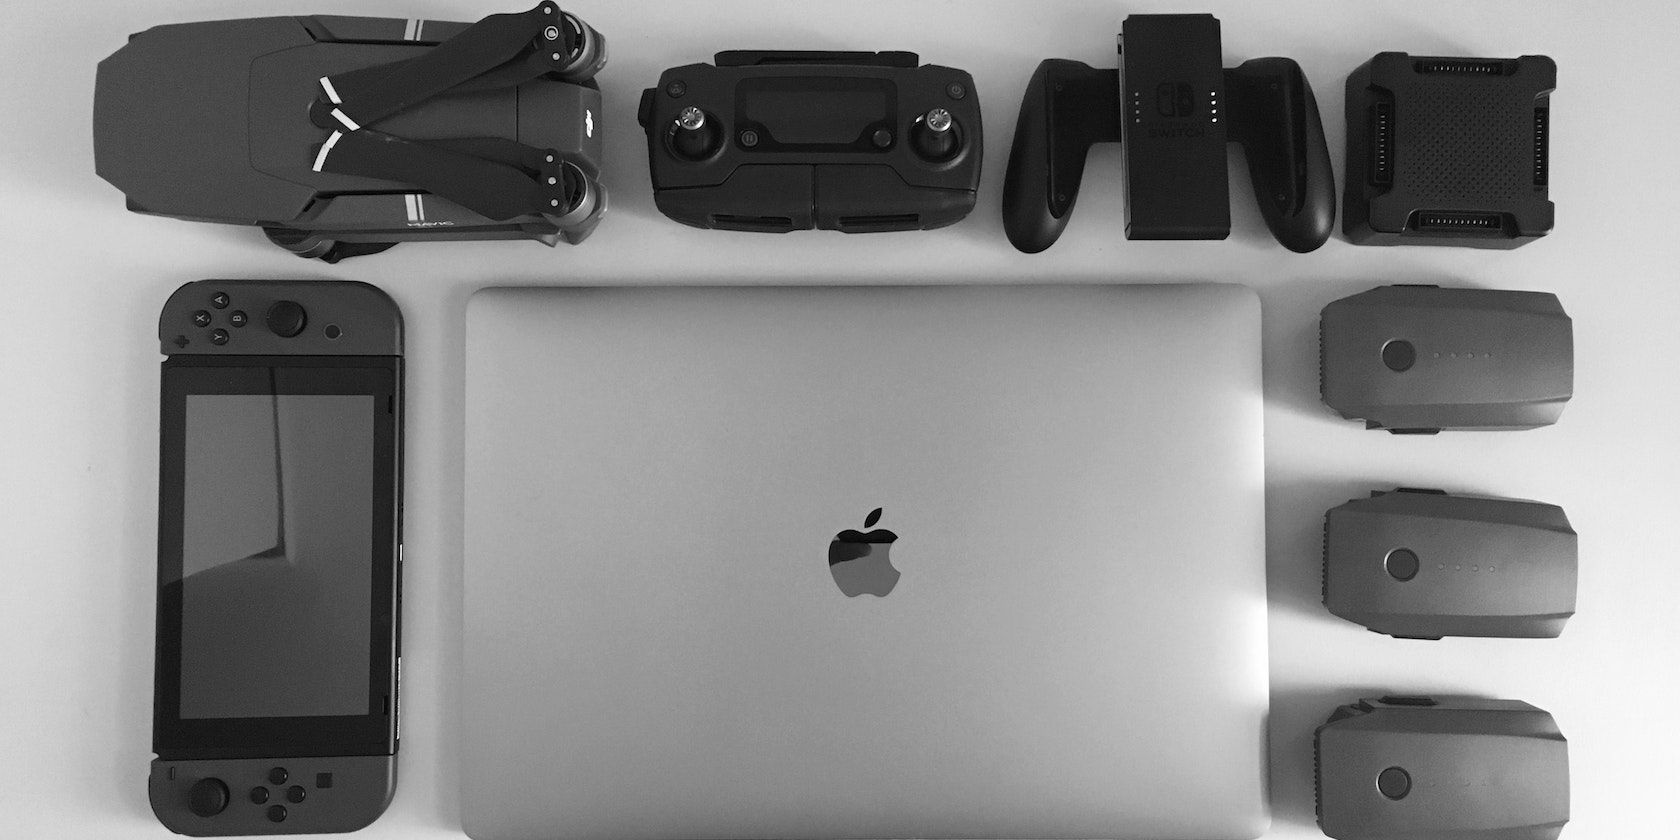 Silver MacBook surrounded by black electronic devices